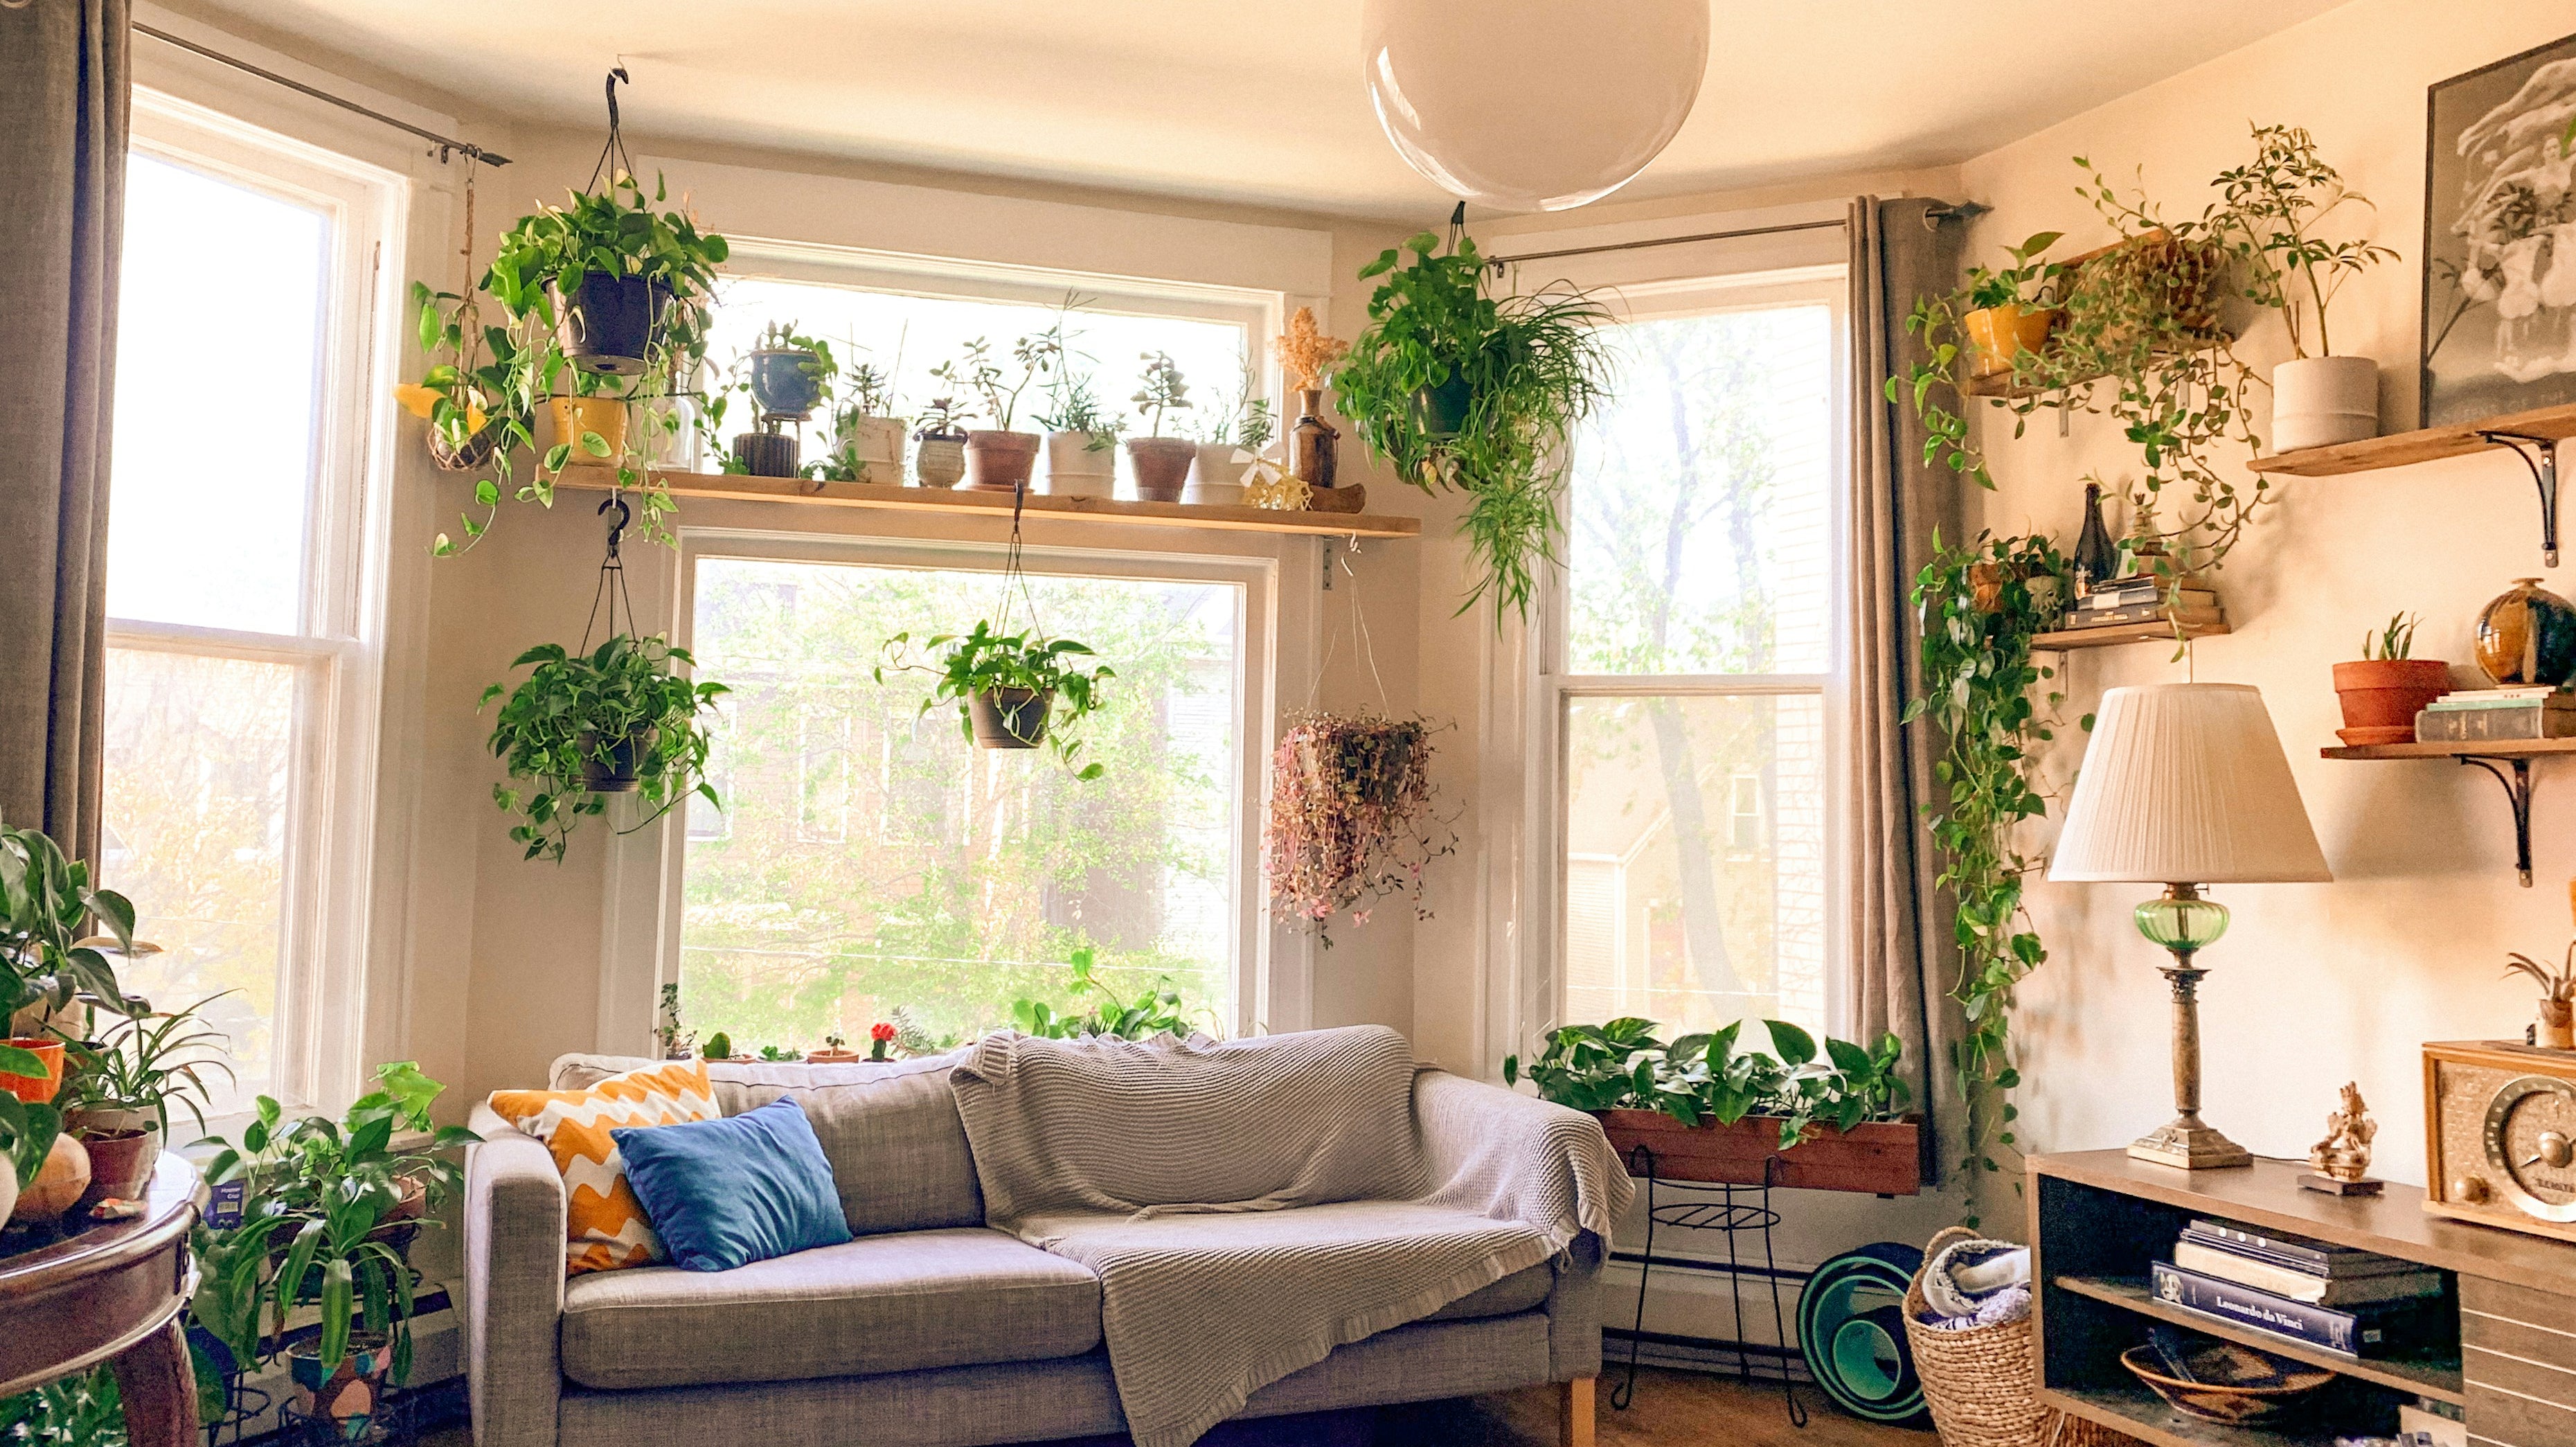 7 Creative Ways to Refresh Your Home Décor with Garden-Inspired Themes